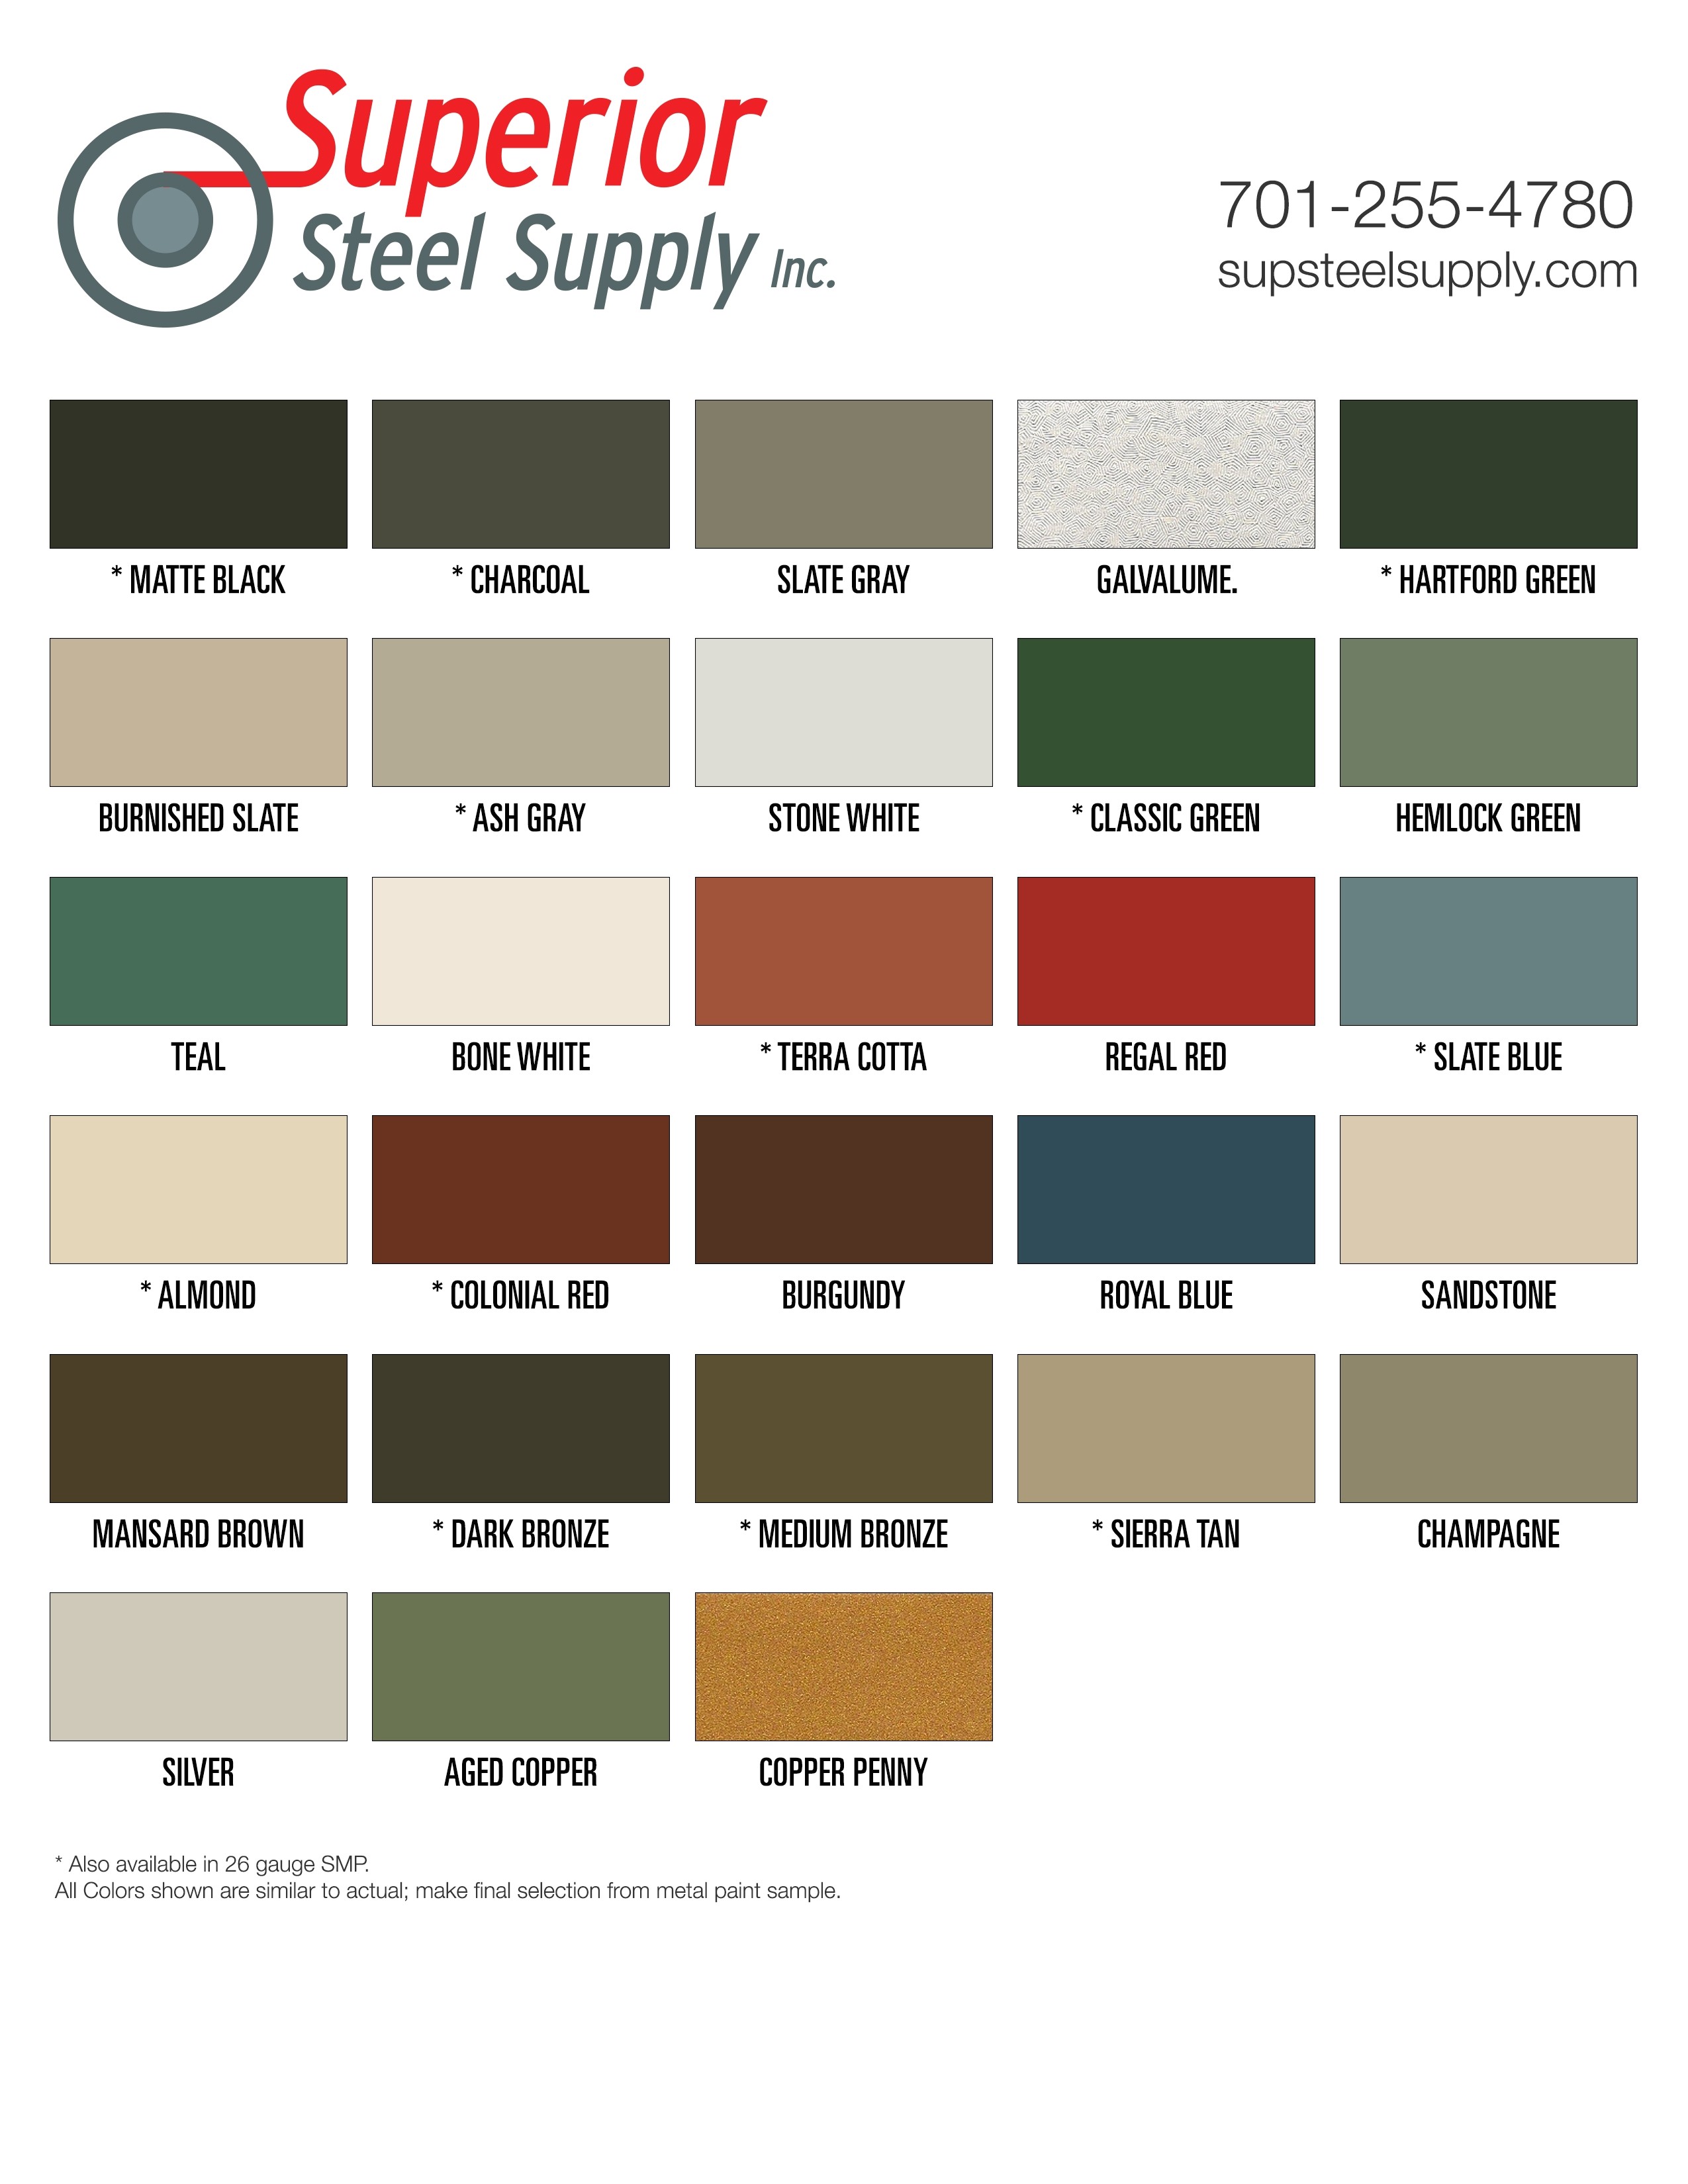 8416 fabral metal roof color chart